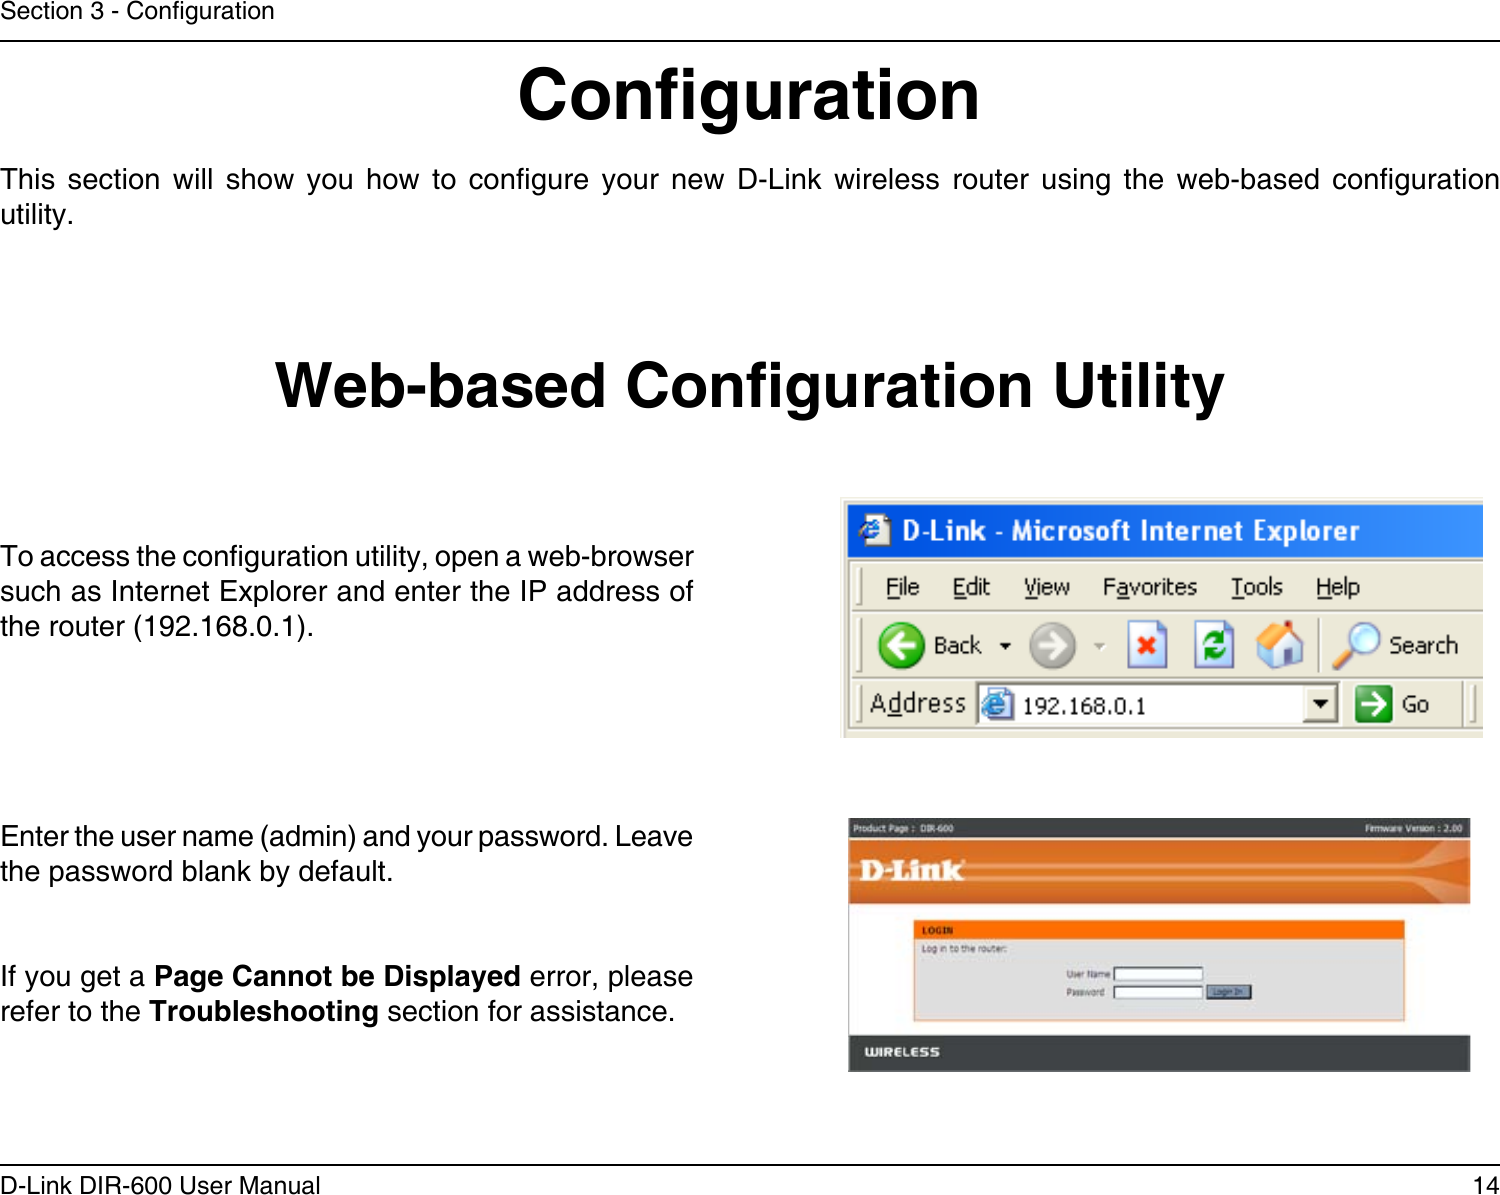 14D-Link DIR-600 User ManualSection 3 - CongurationCongurationThis  section  will  show  you  how  to  congure  your  new  D-Link  wireless  router  using  the  web-based  conguration utility.Web-based Conguration UtilityTo access the conguration utility, open a web-browser such as Internet Explorer and enter the IP address of the router (192.168.0.1).Enter the user name (admin) and your password. Leave the password blank by default.If you get a Page Cannot be Displayed error, please refer to the Troubleshooting section for assistance.